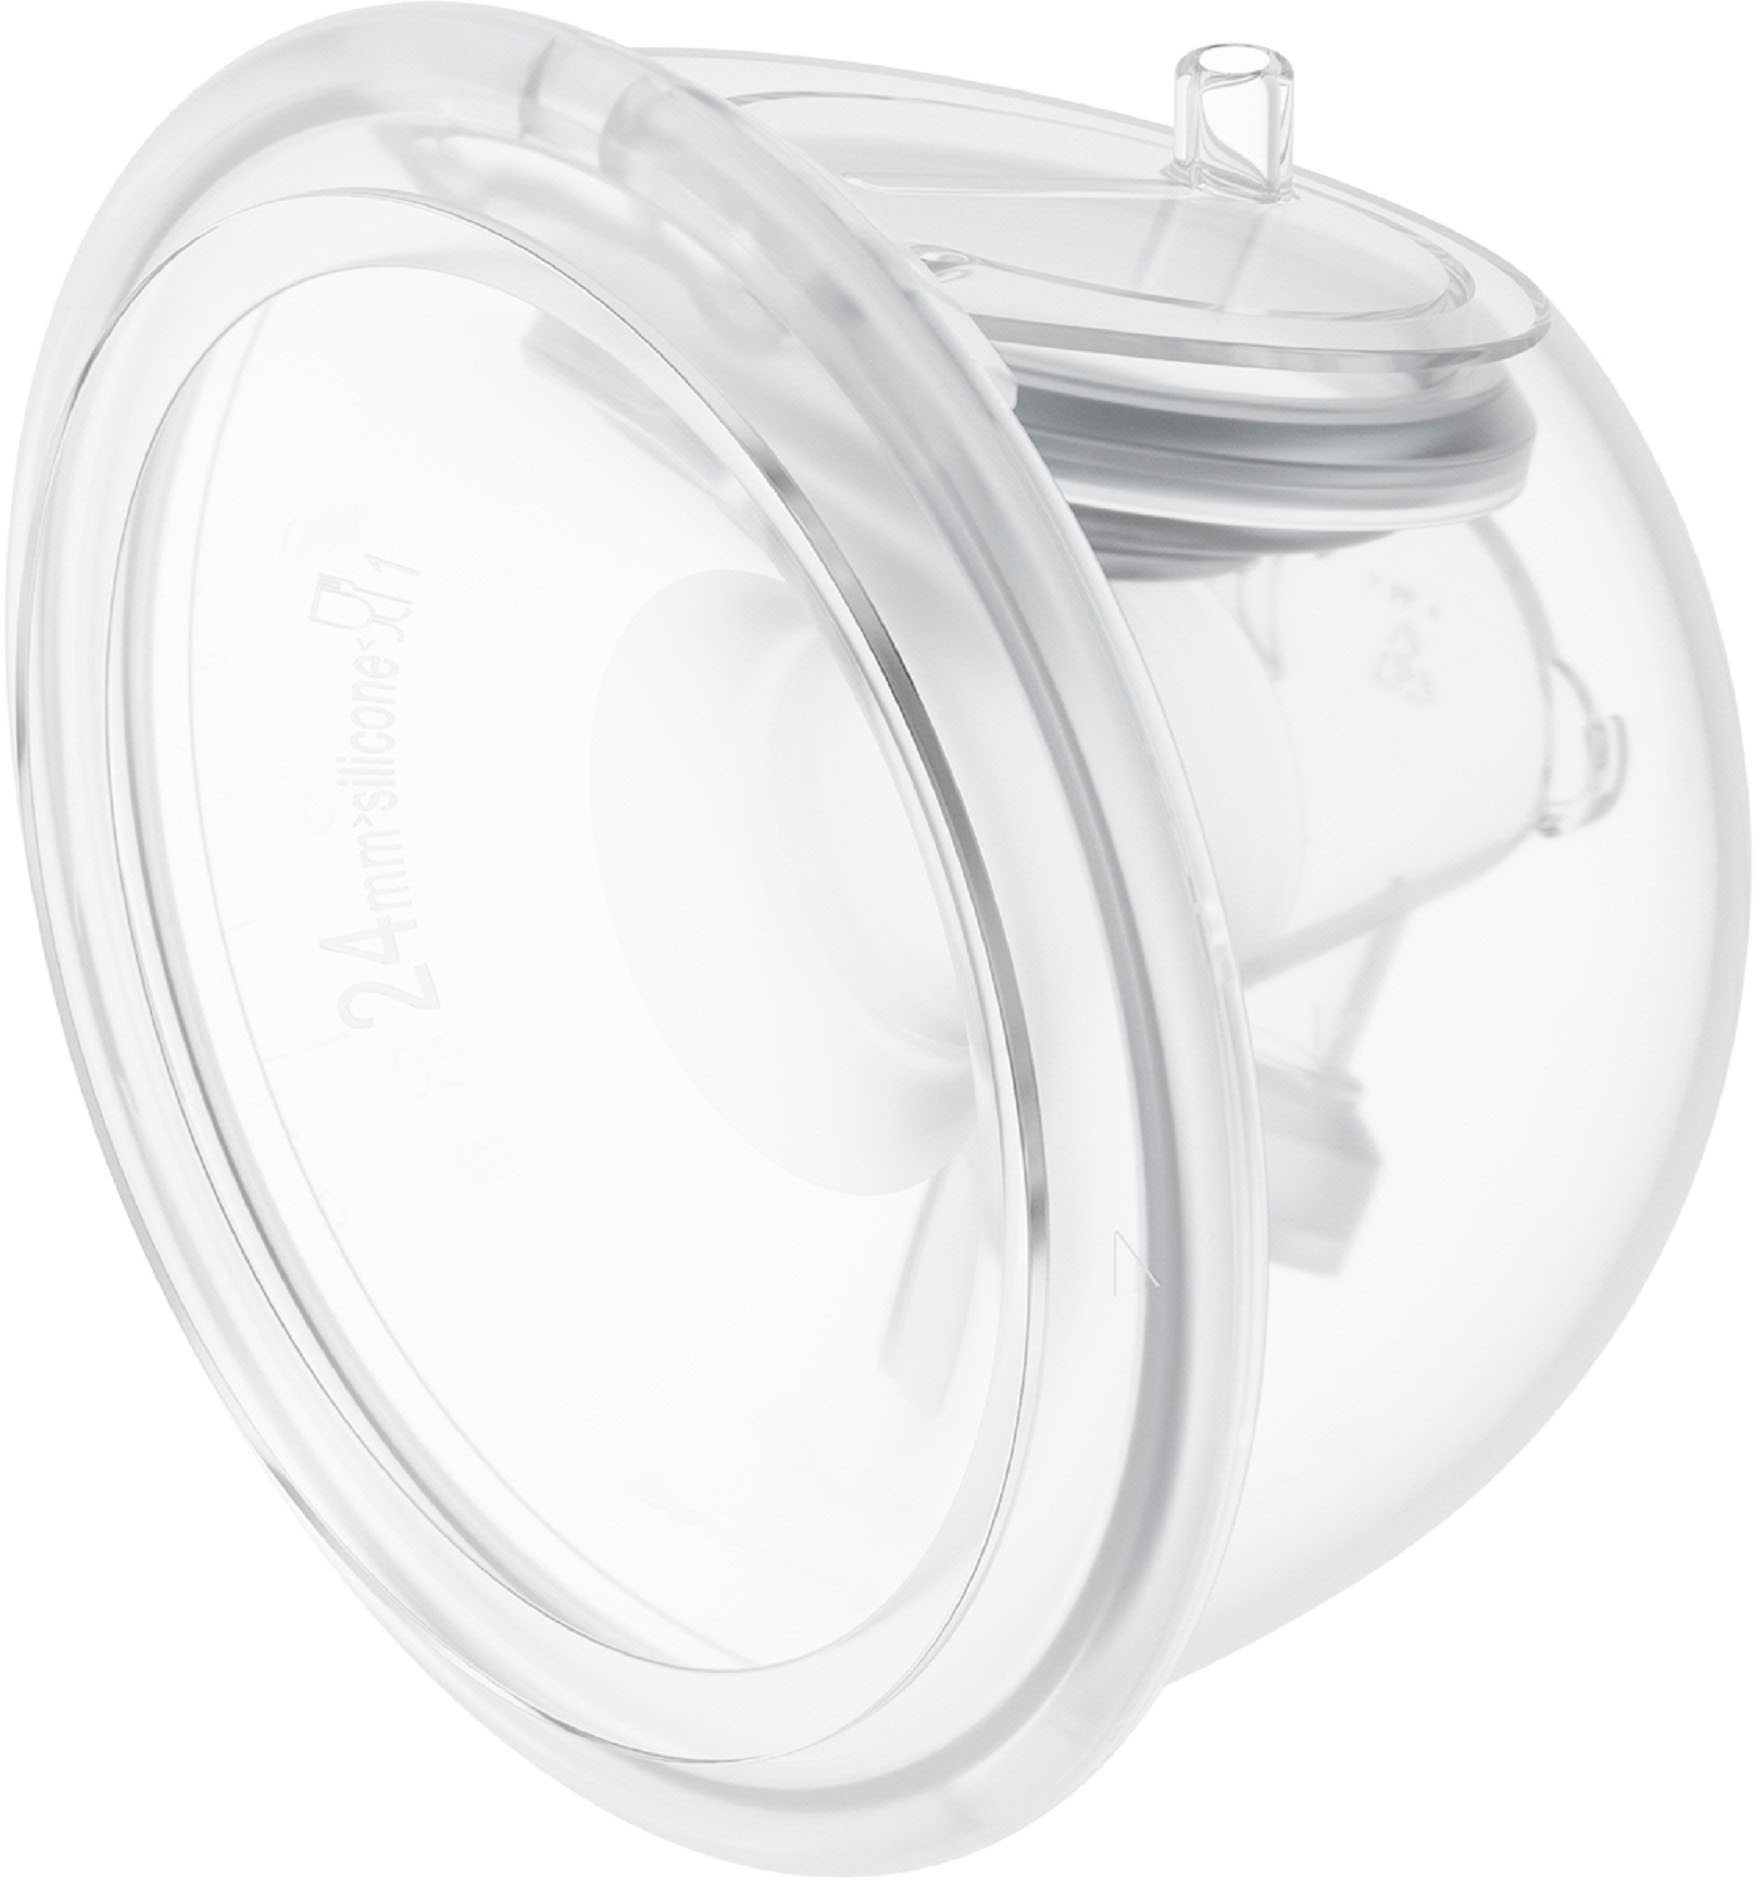 Willow - Go Wearable Breast Pump 7 oz. Reusable Container Set (2